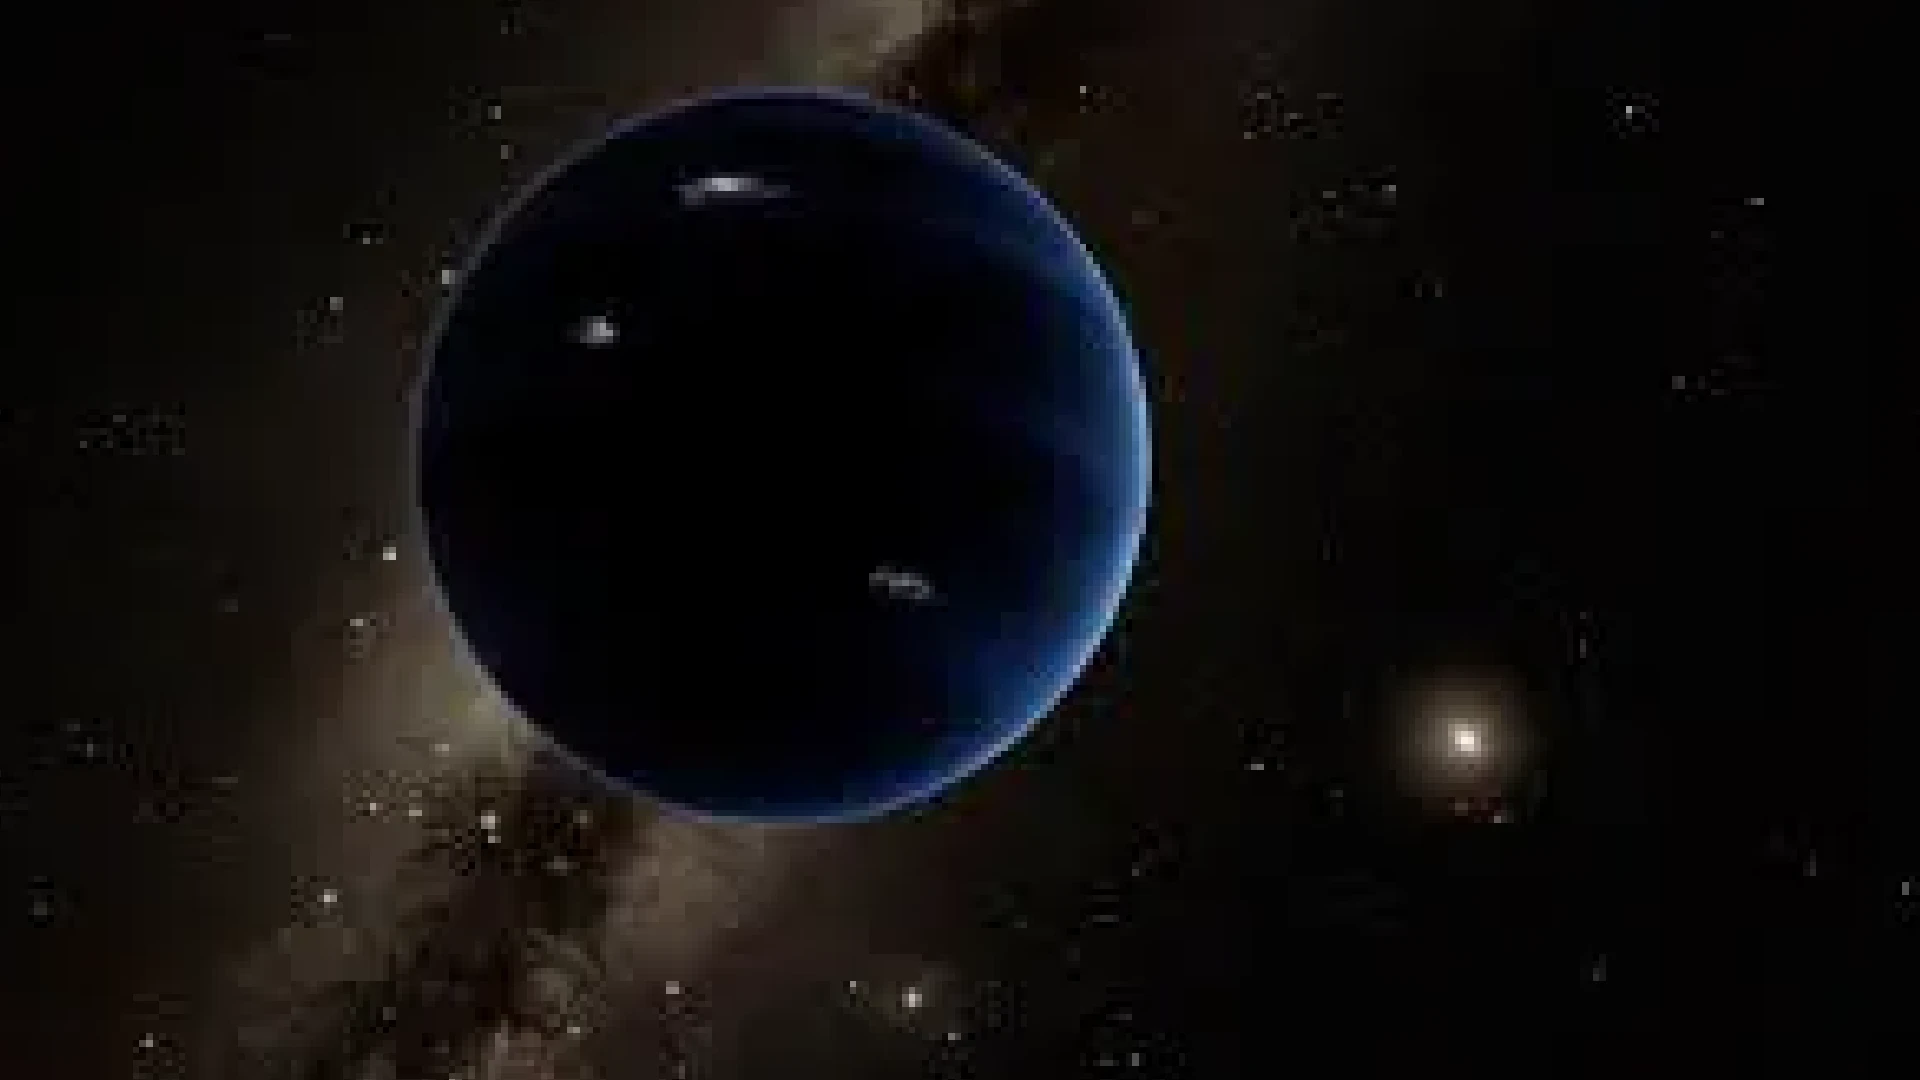 An Emerging Scientific Theory Implies The Existence Of A Curious Ninth Planet Known As ‘Planet X’